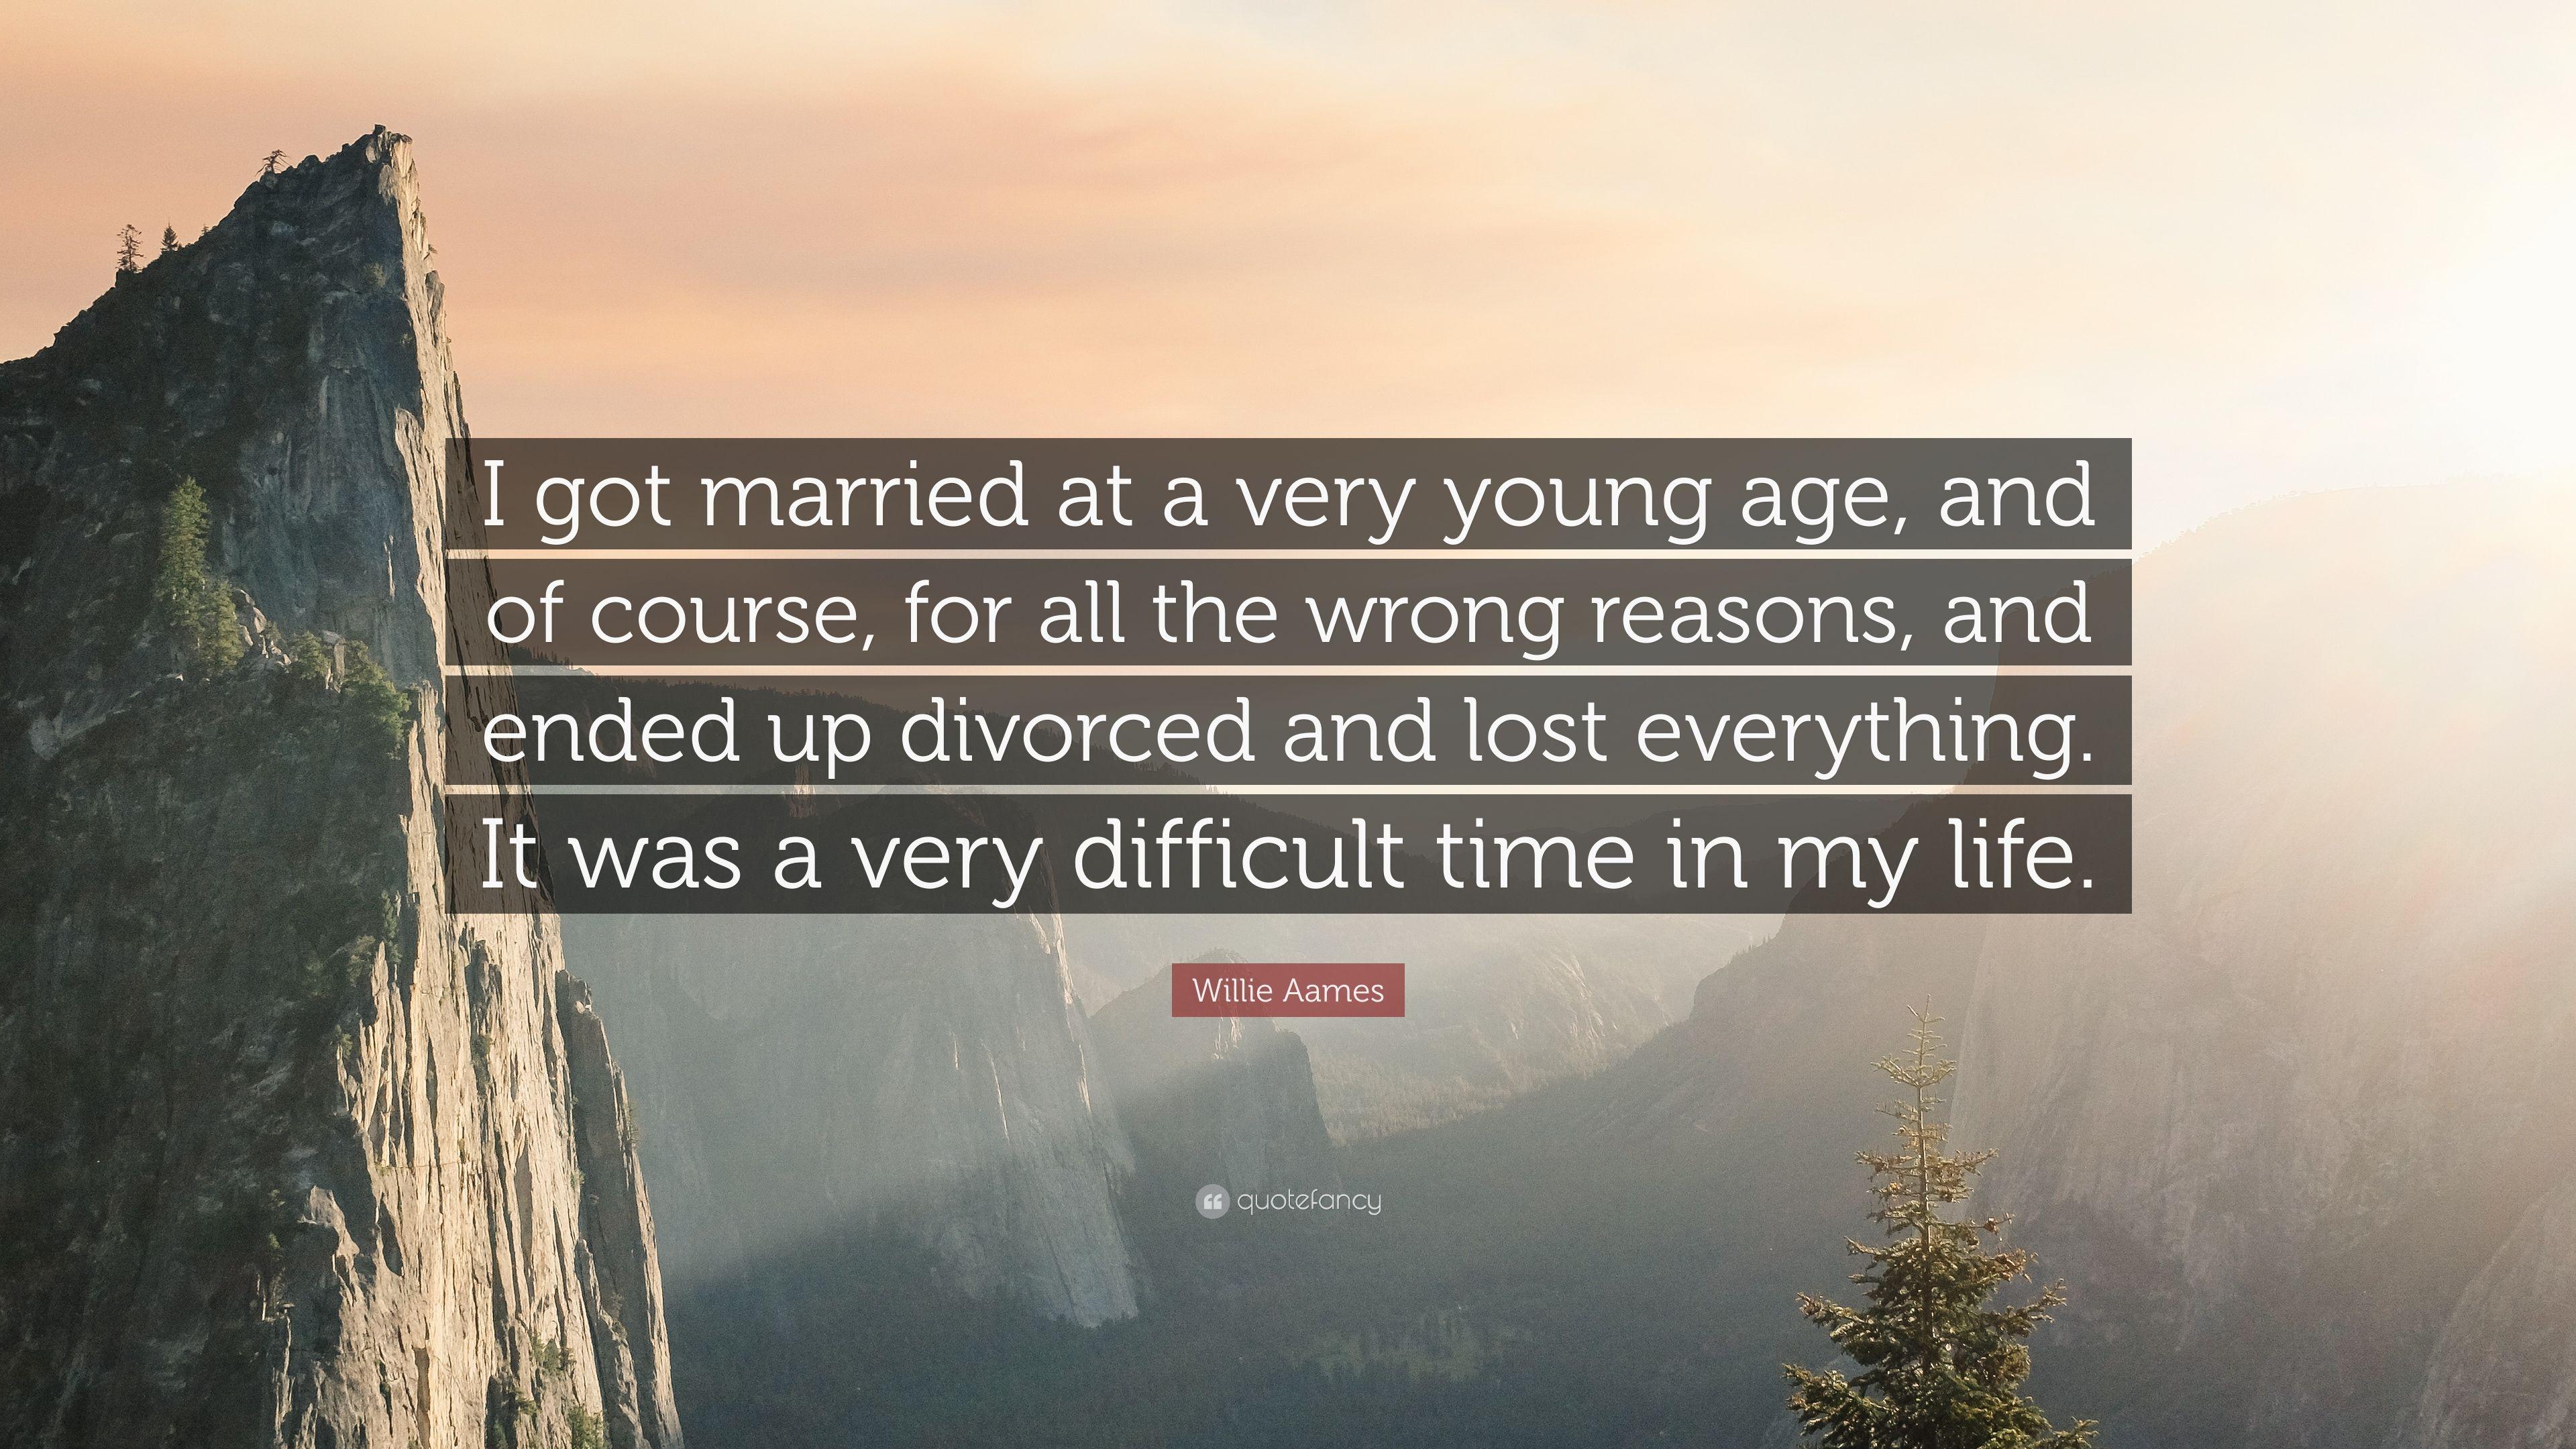 Willie Aames Quote: “I got married at a very young age, and